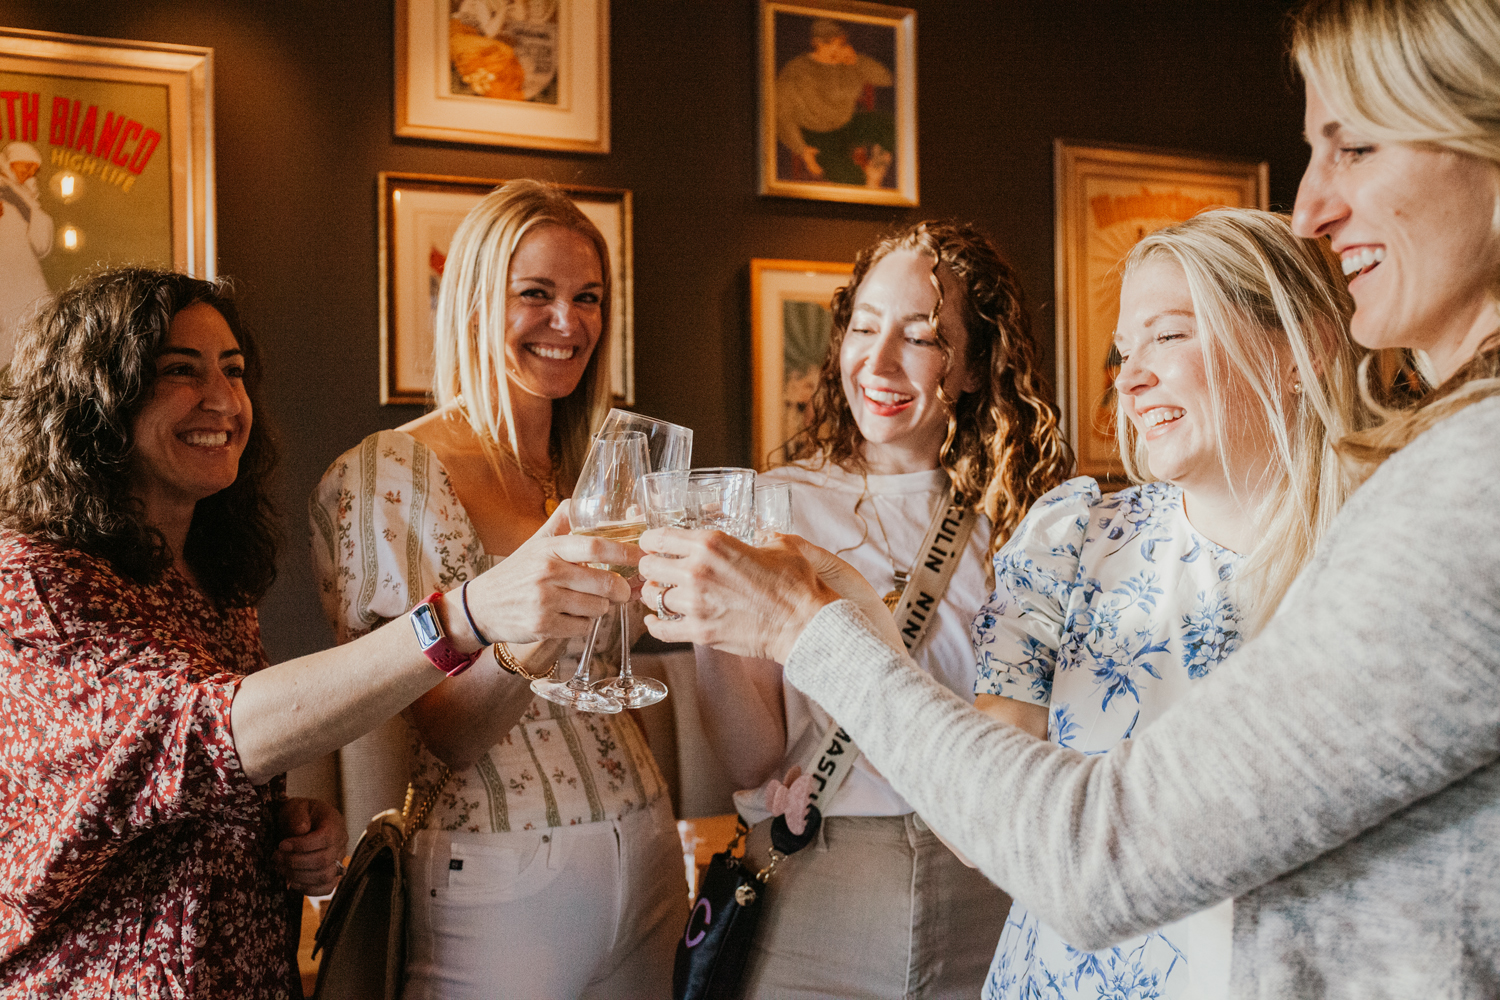 Image of five women clinking wine glasses